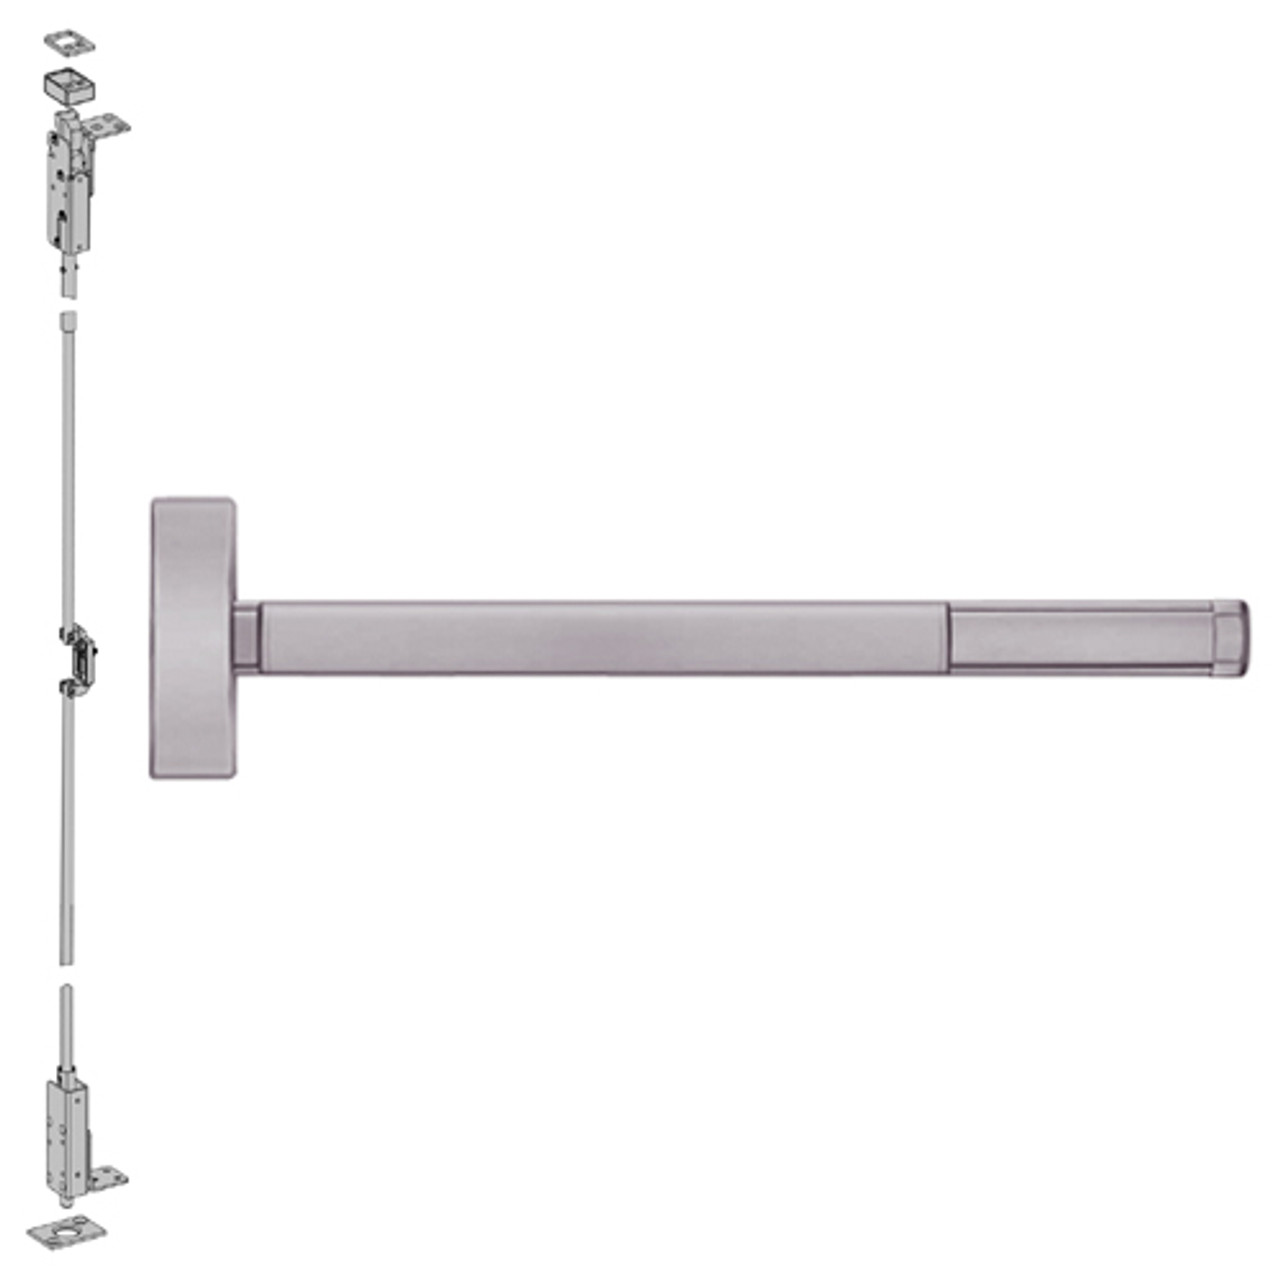 2703LBRCD-630-48 PHI 2700 Series Wood Door Concealed Vertical Rod Device Prepped for Key Retracts Latchbolt with Less Bottom Rod in Satin Stainless Steel Finish